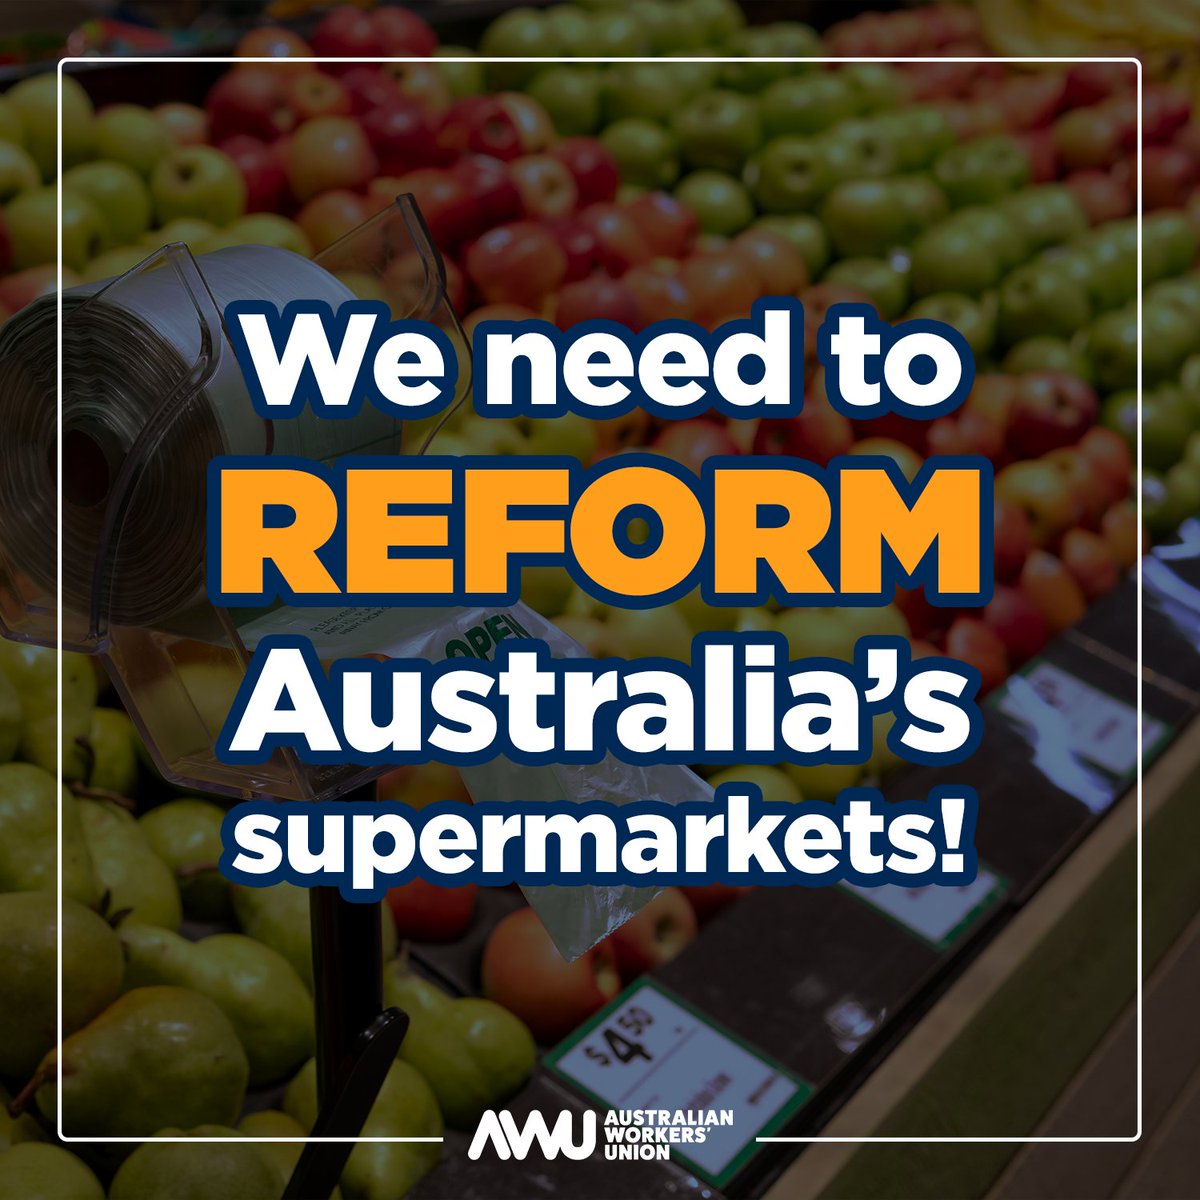 The AWU welcomes the government’s plan to reform Australia’s merger rules. It's an important first step in tackling abuse of market power by Coles and Woolworths.

But we need to do more.

#AWU #AWUnion #ausunions #auspol #unionsaus #coles #woolies #supermarkets #ACCC